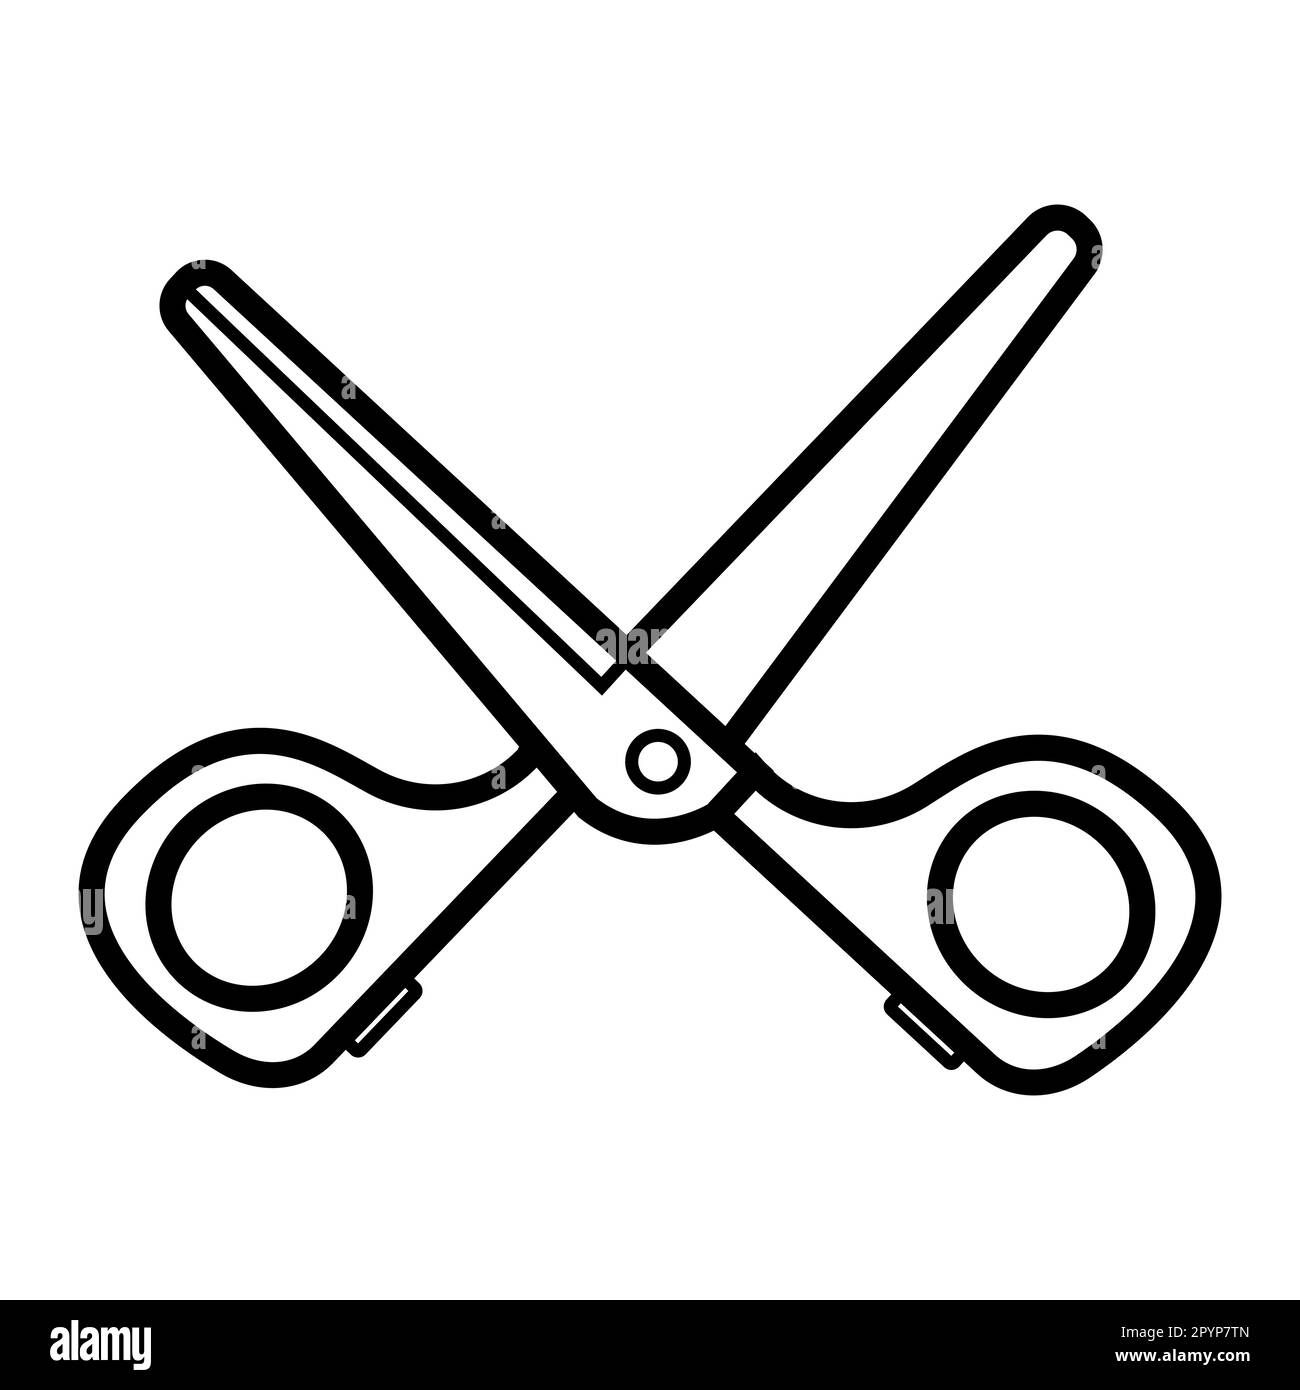 Black and white simple linear icon of trendy glamorous sharp metal hairdressing, nail scissors for cutting nails, doing hair and beauty guidance. Vect Stock Vector